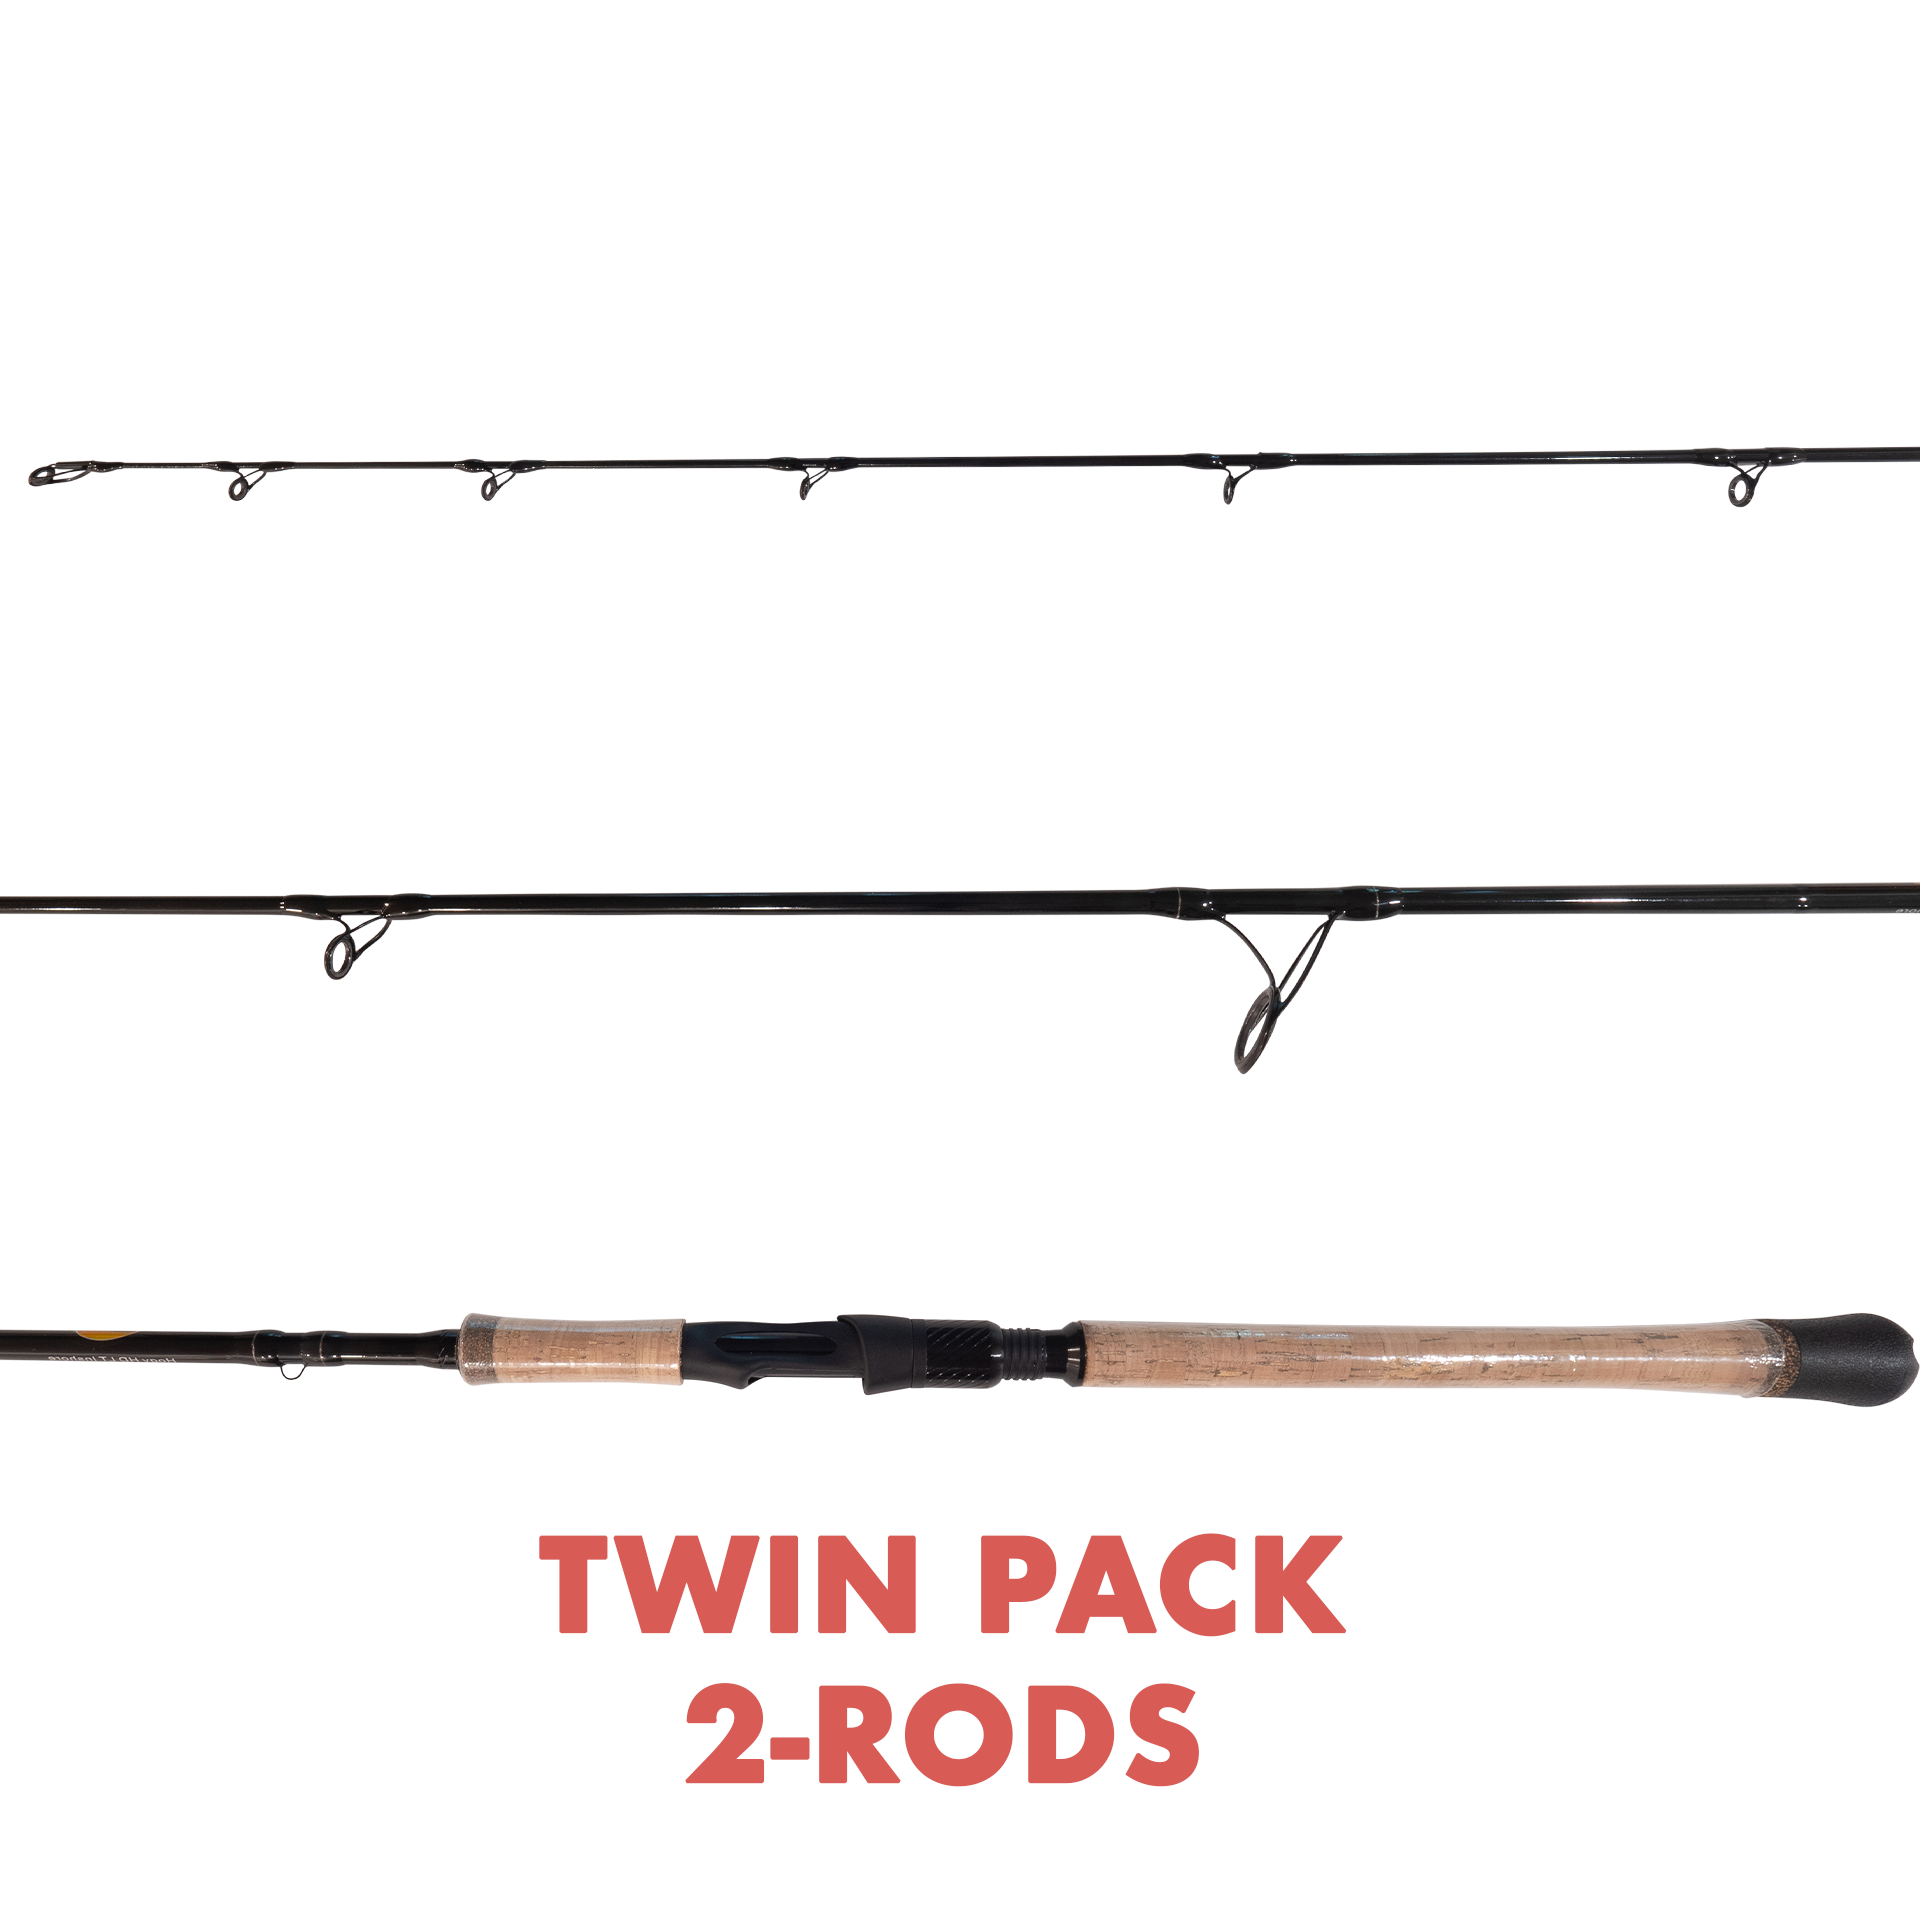 TWIN PACK Inshore Spinning Rod: Mod-Fast Action 7' ML (3/8oz - 1oz)